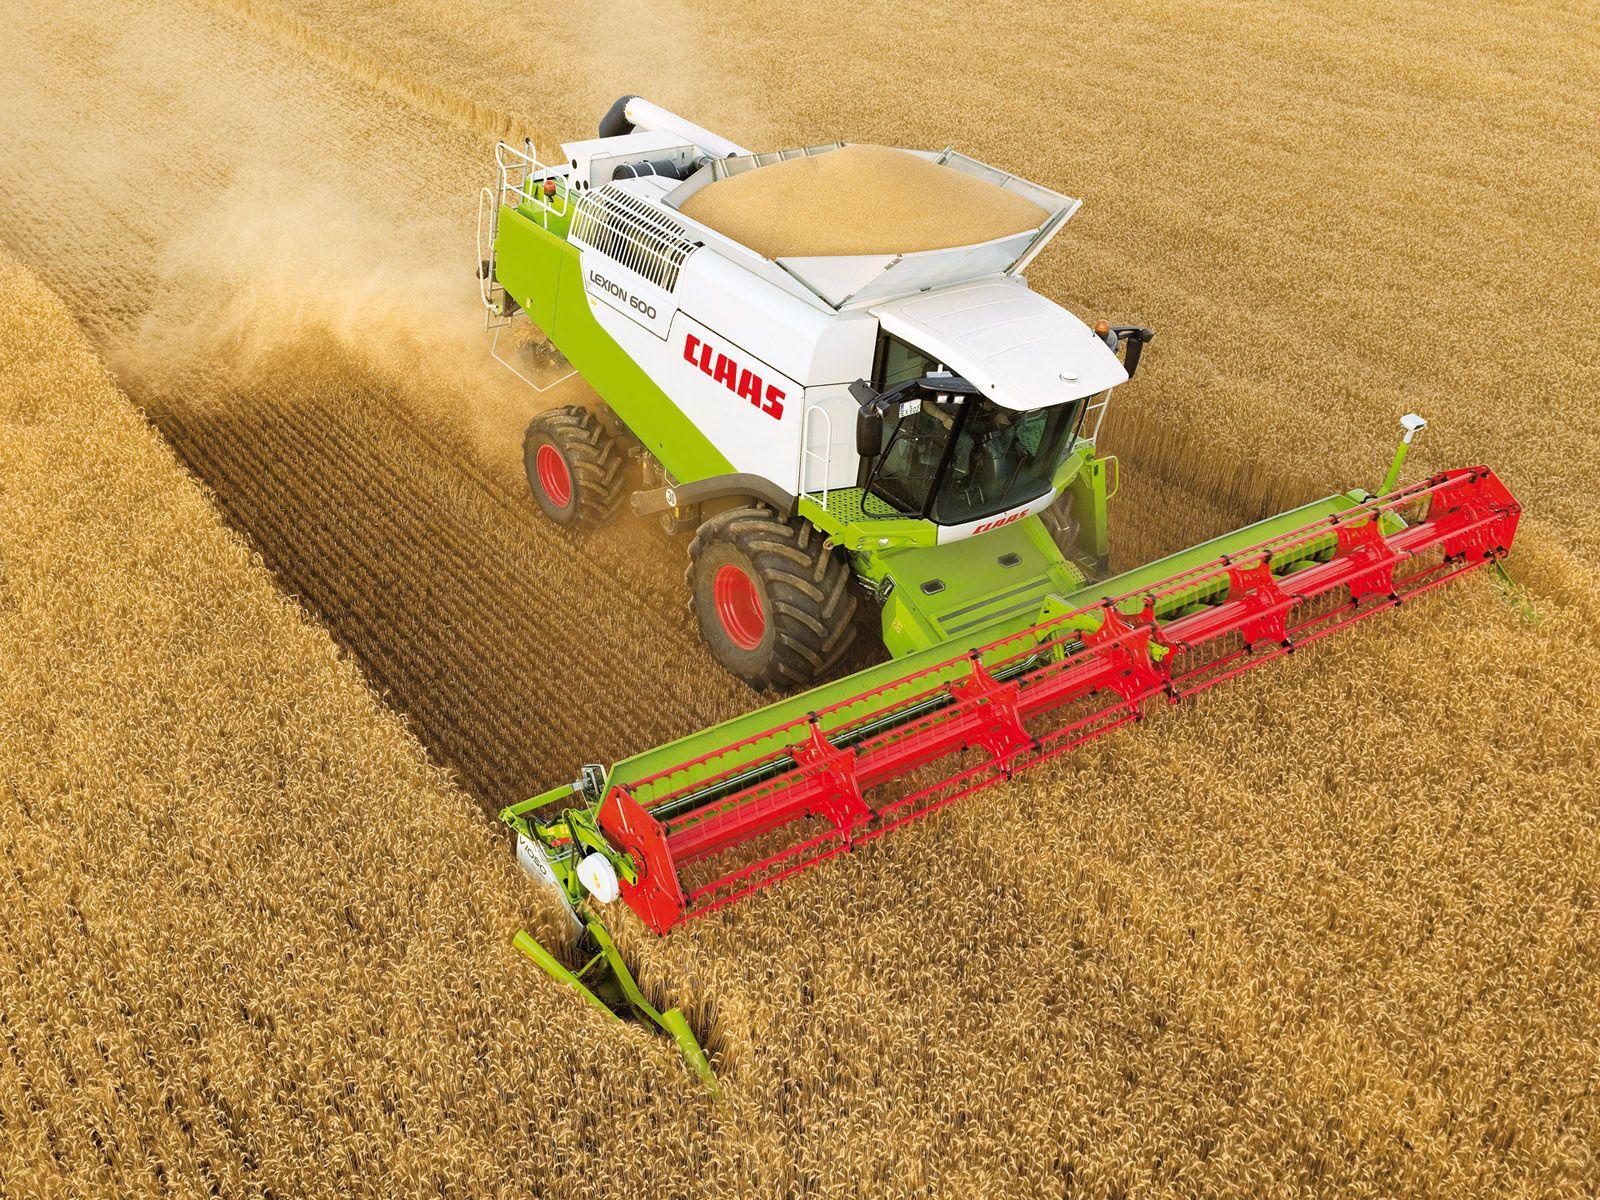 Claas Lexion picture # 54739. Claas photo gallery